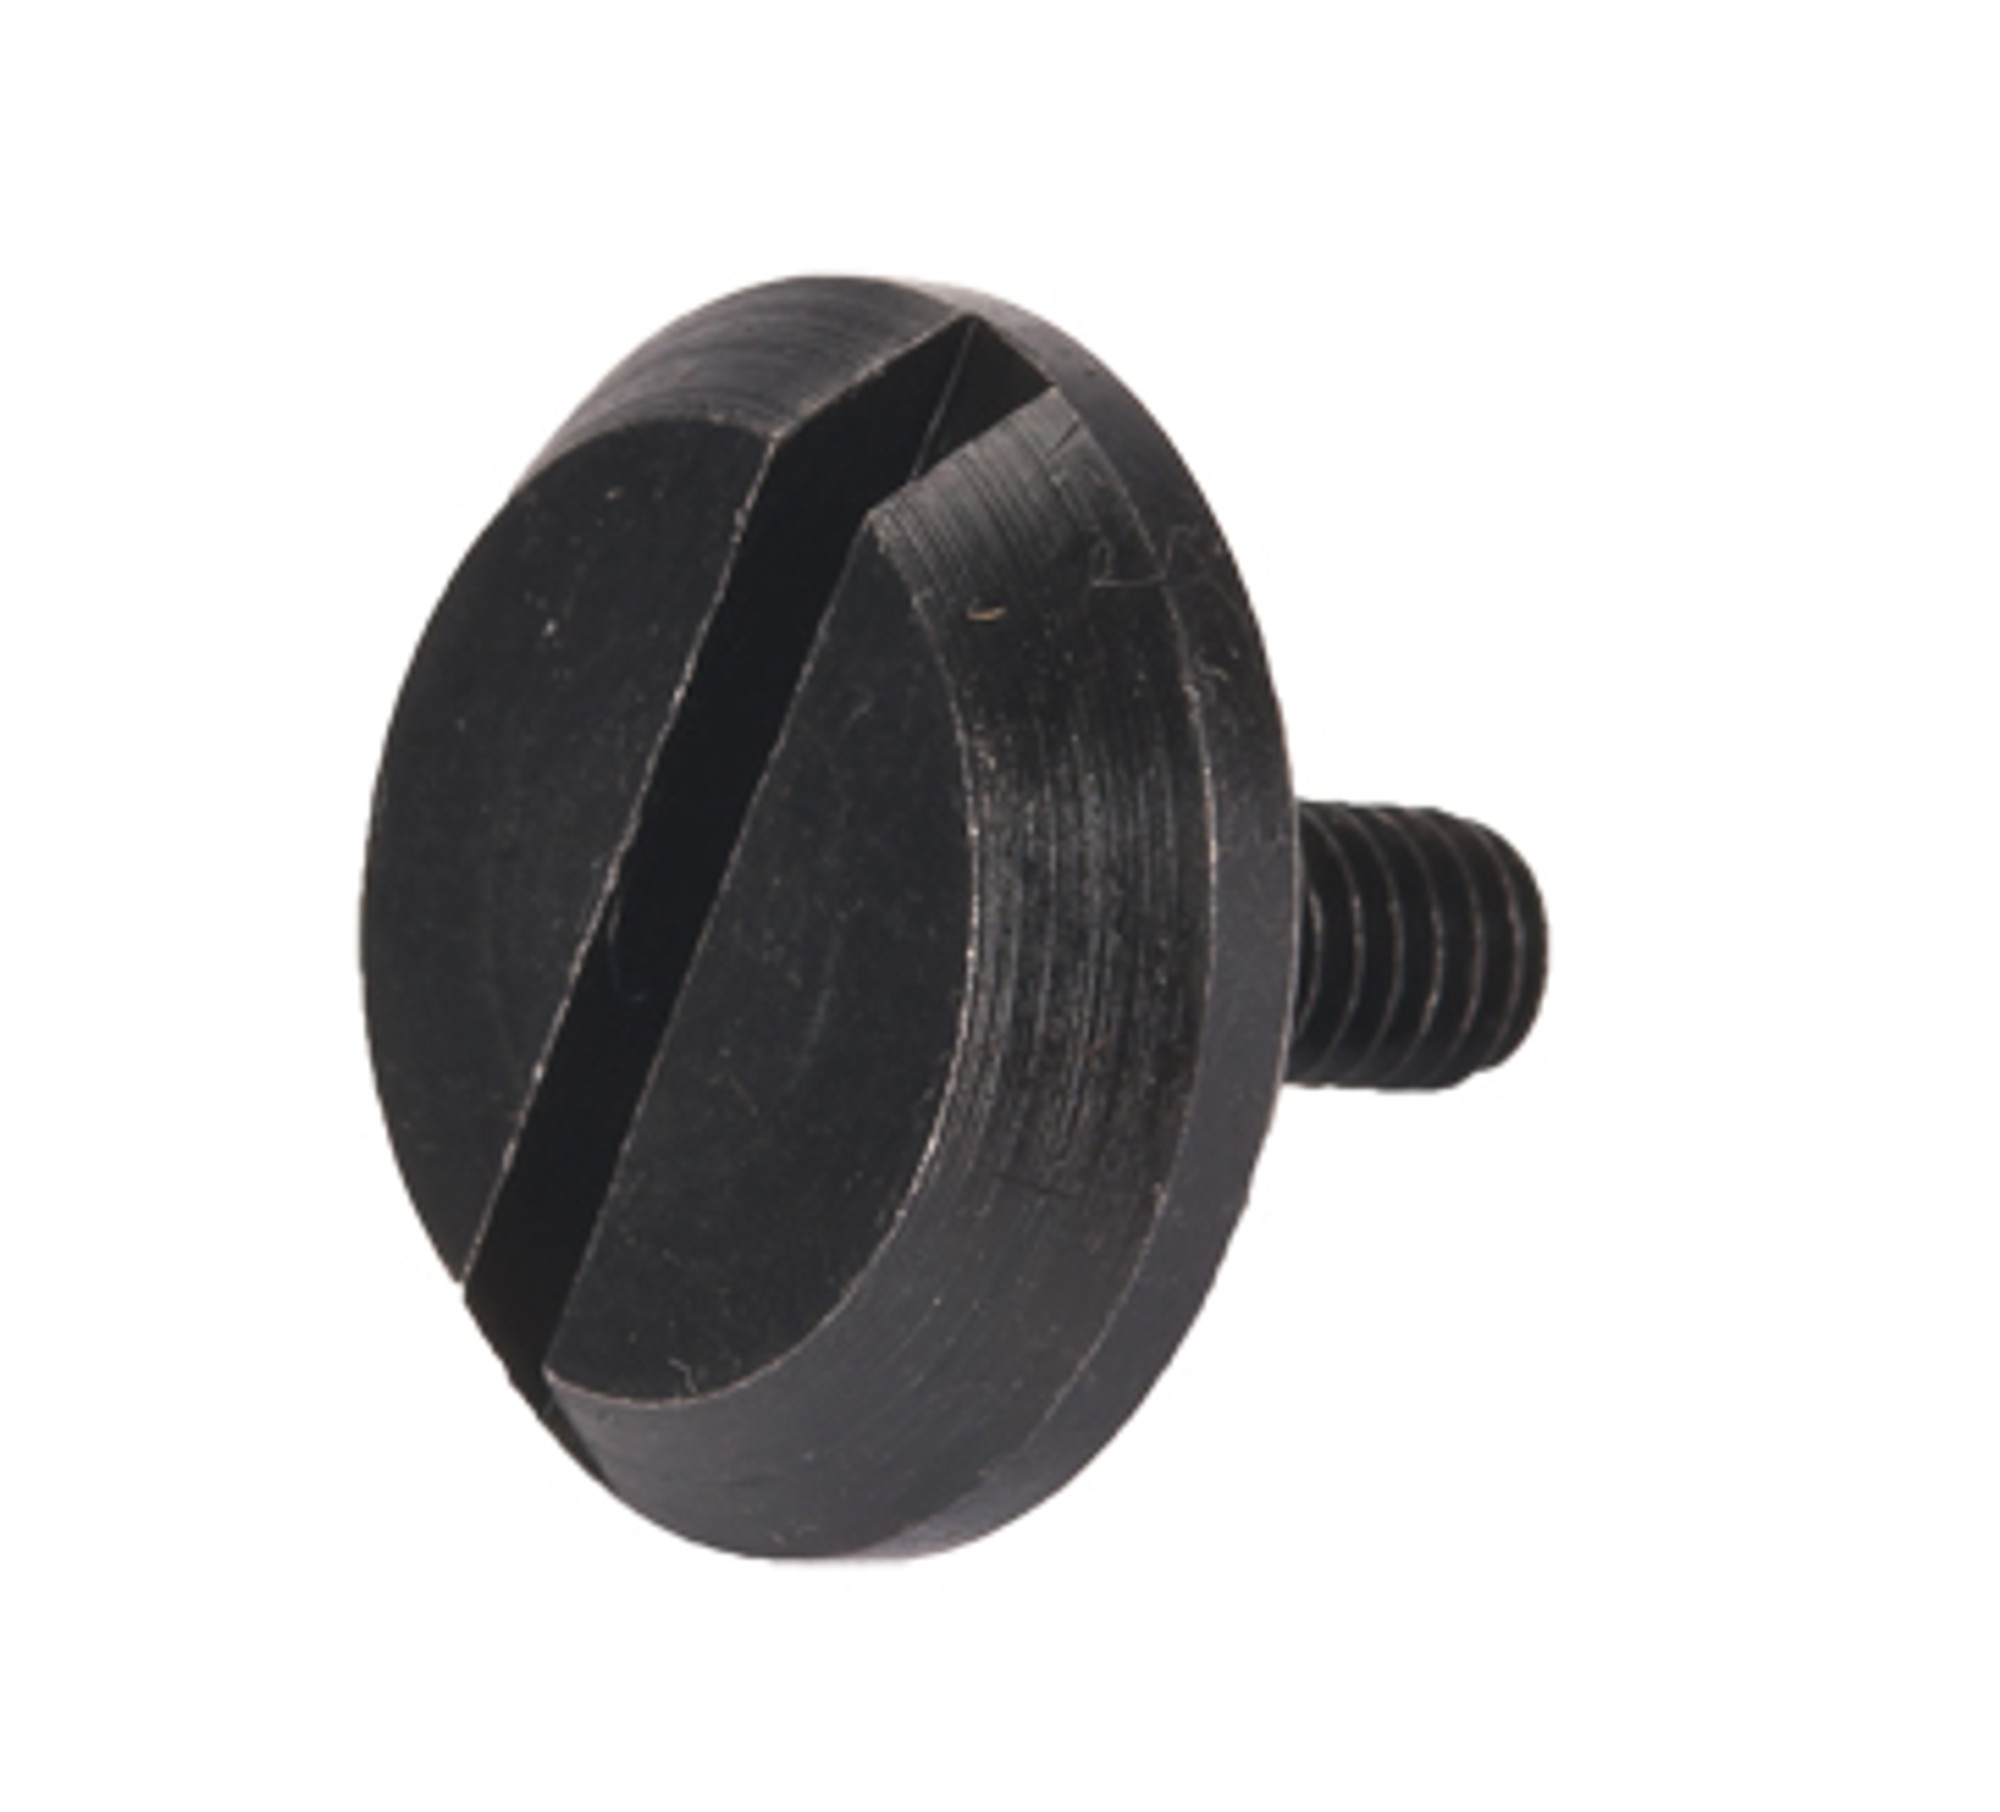 Replacement Spring Guide Screw for S&T PPSH Airsoft AEG Rifle